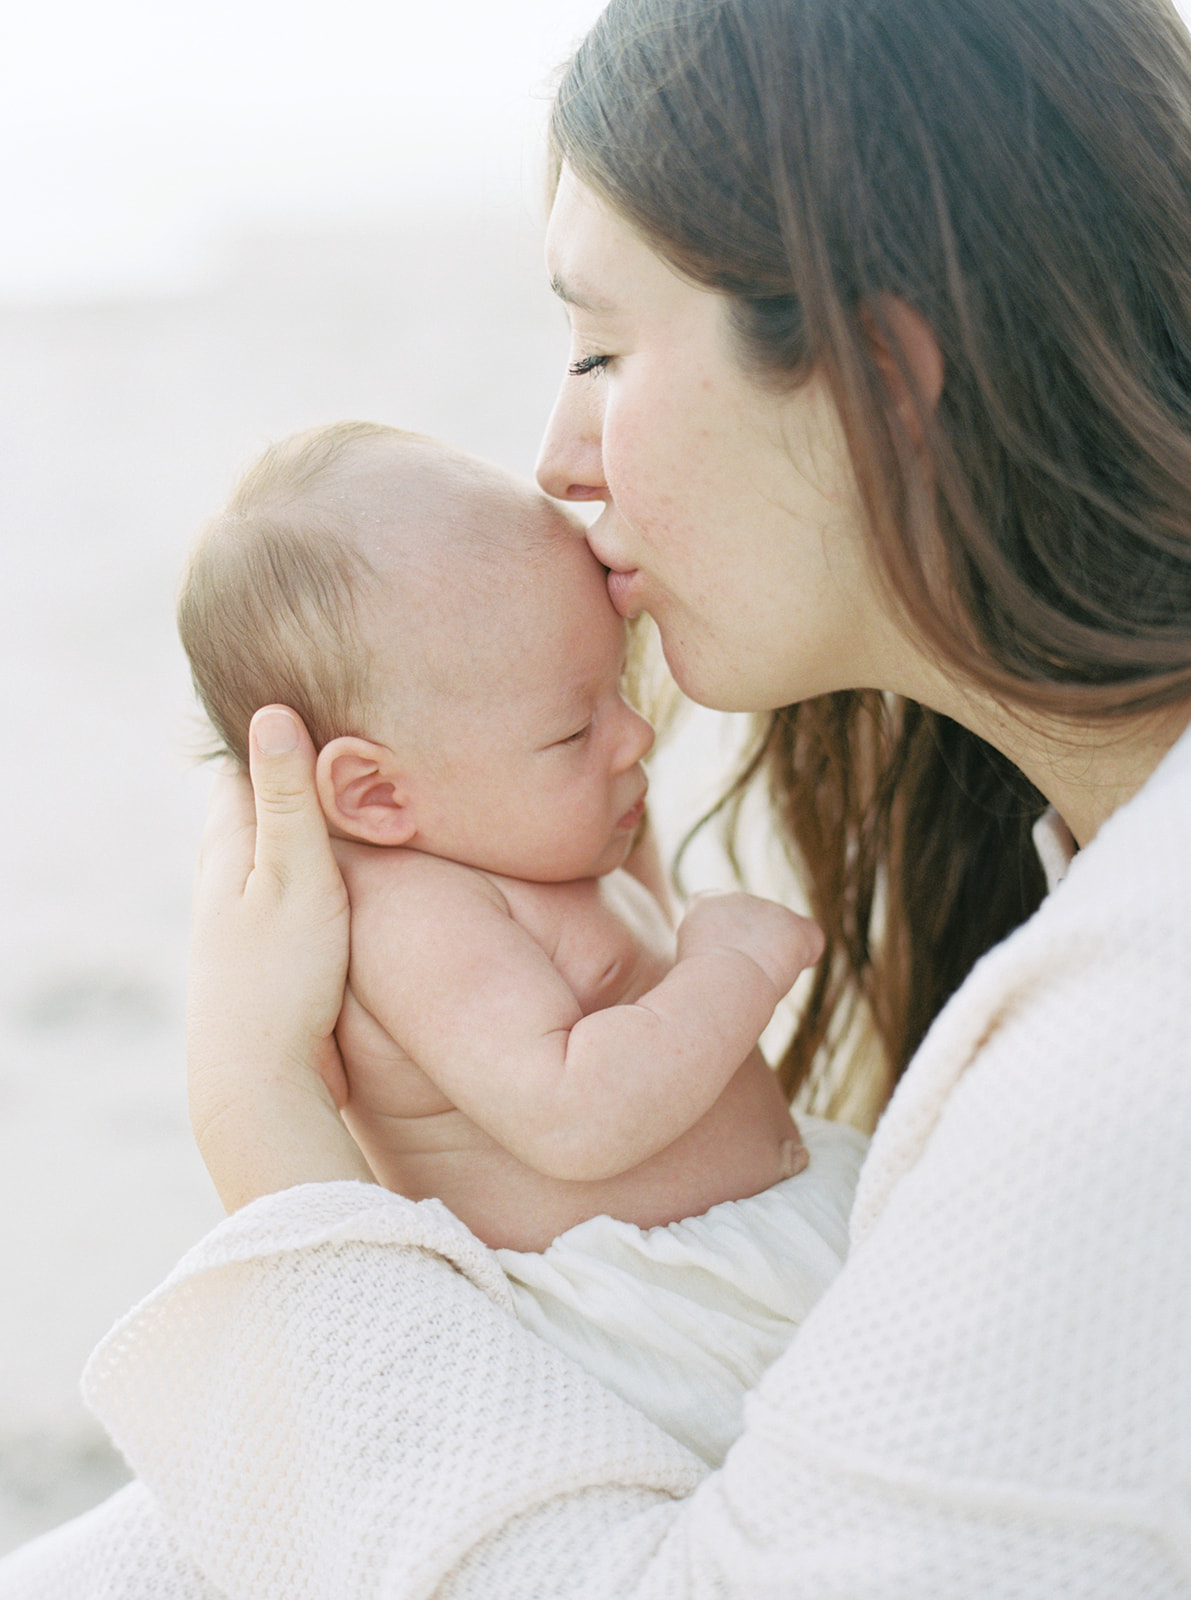 Mom gives baby a tender kiss on the forehead during organic newborn portraits on the beach.